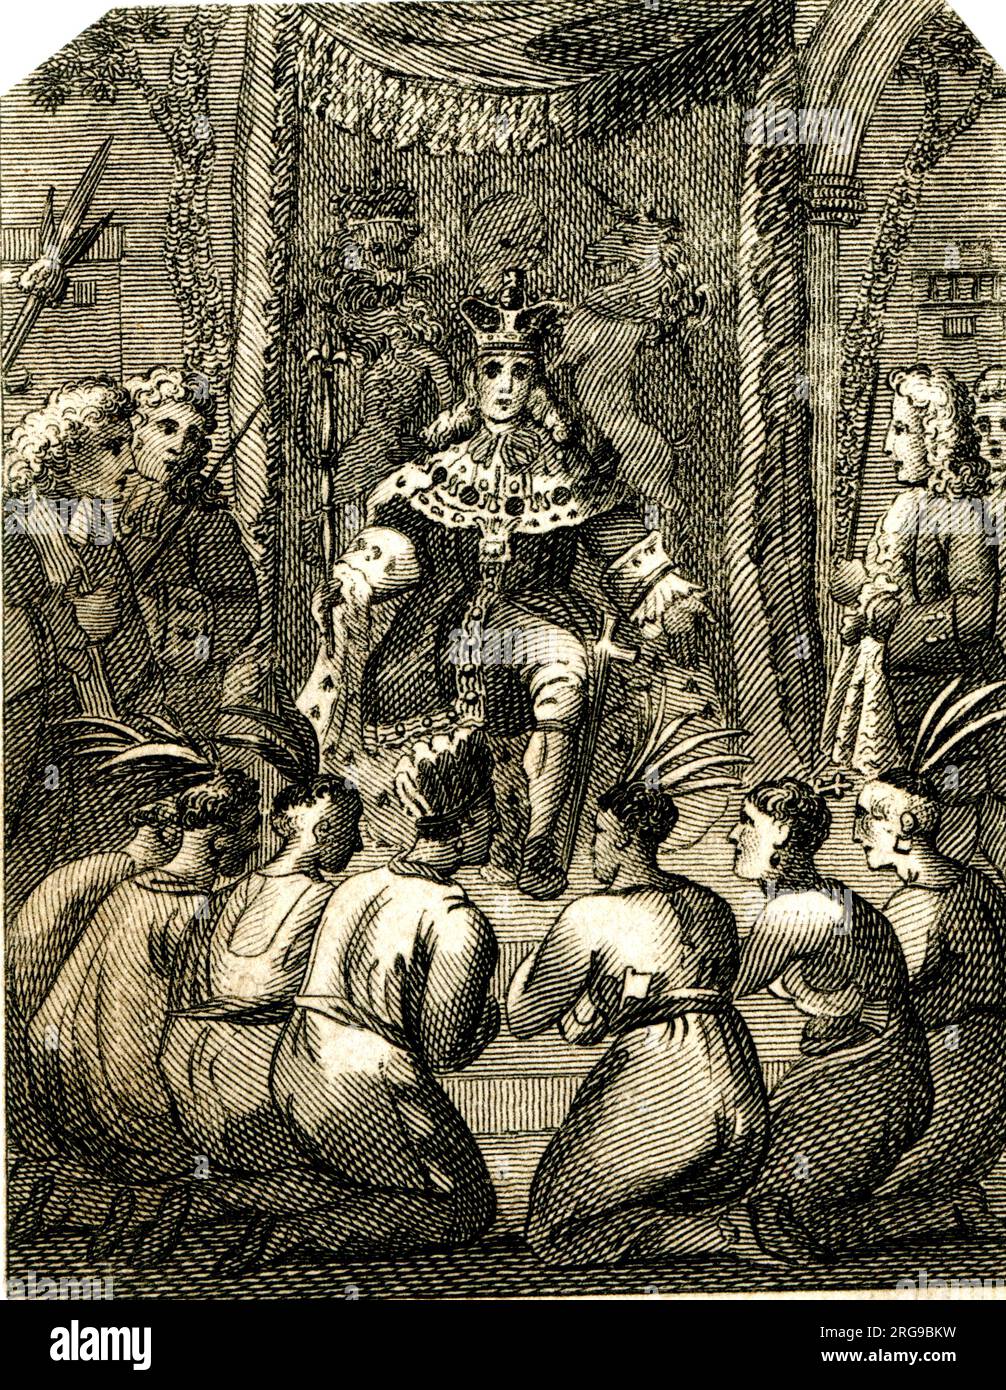 Seven Cherokee Chief's introduced to the King George 1730 - 18th century engraving Stock Photo